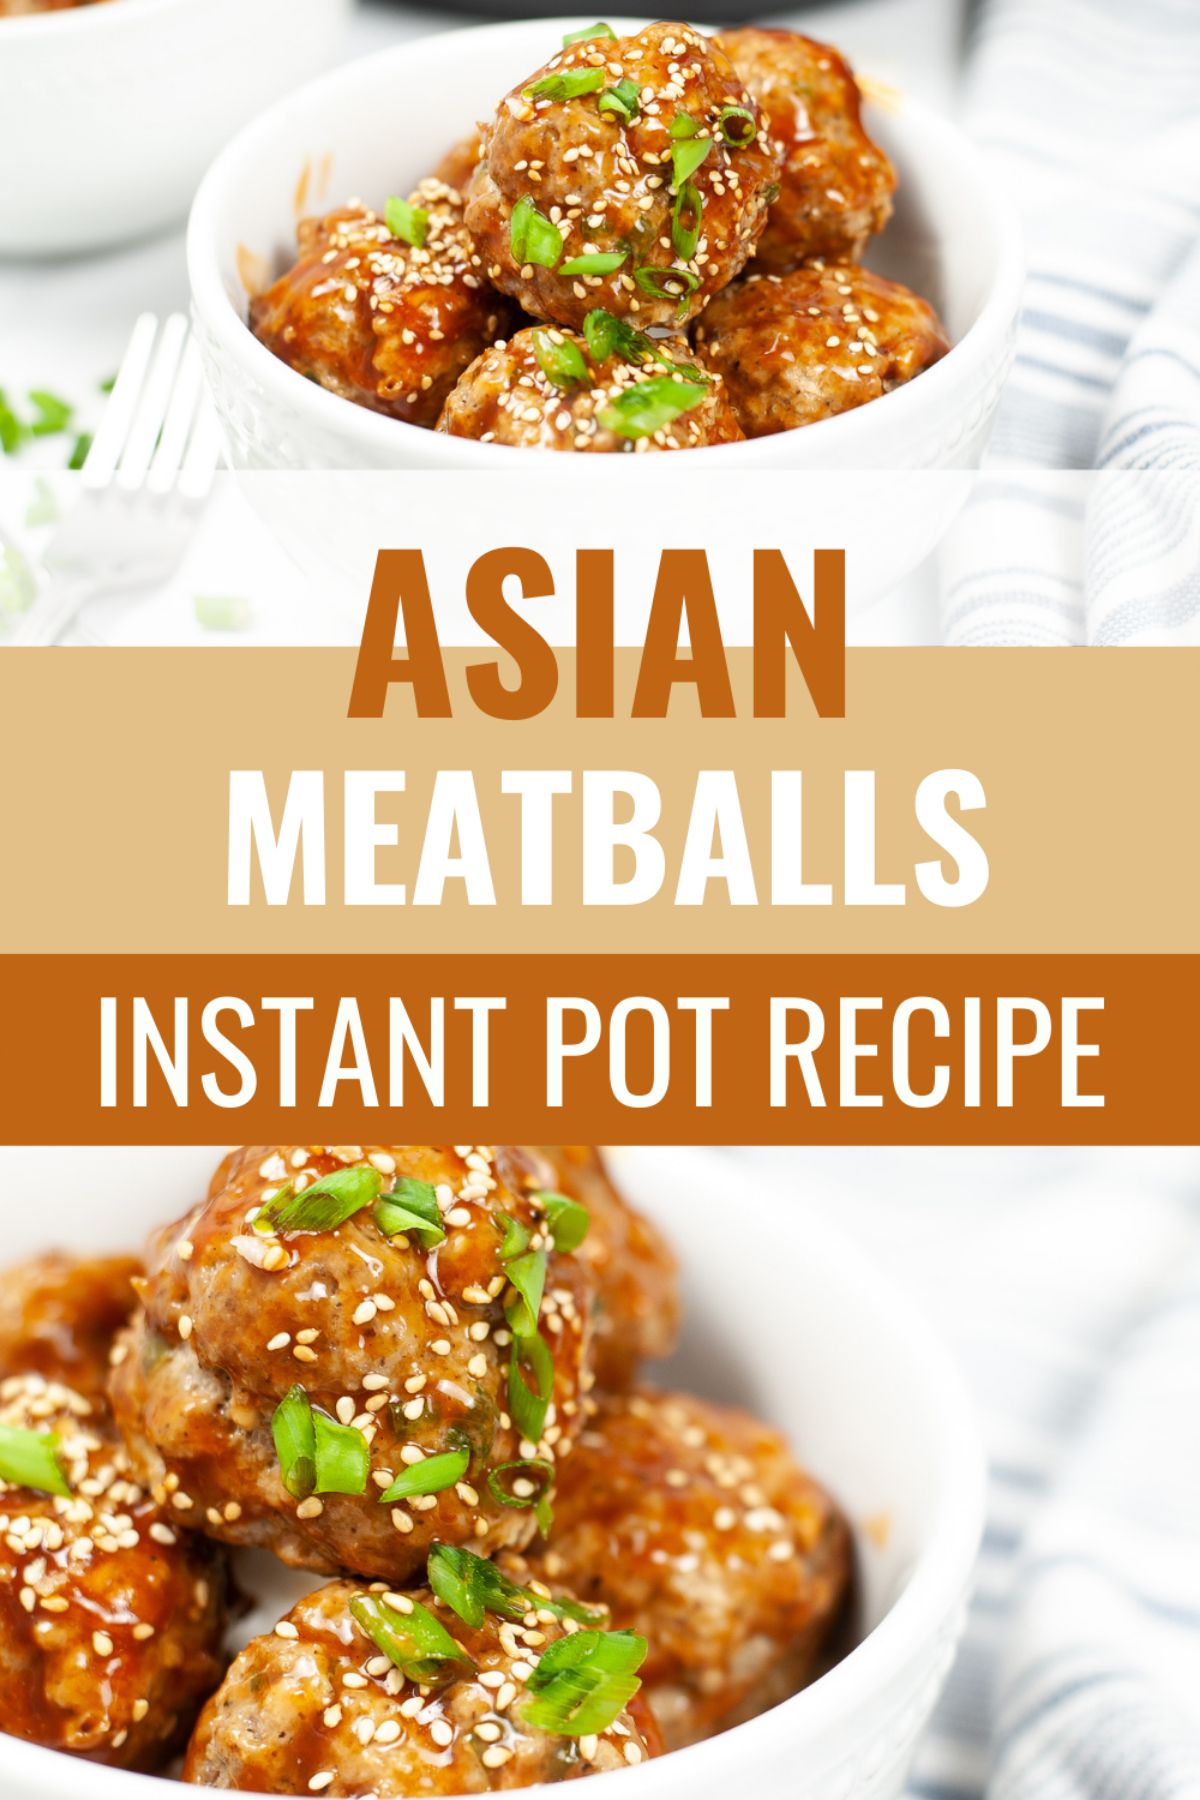 Instant Pot Asian Meatballs are the perfect easy weeknight meal. They are made with ground beef, rice, and a delicious Asian-inspired sauce. #instantpot #pressurecooker #asianmeatballs #asianfood #recipe via @wondermomwannab